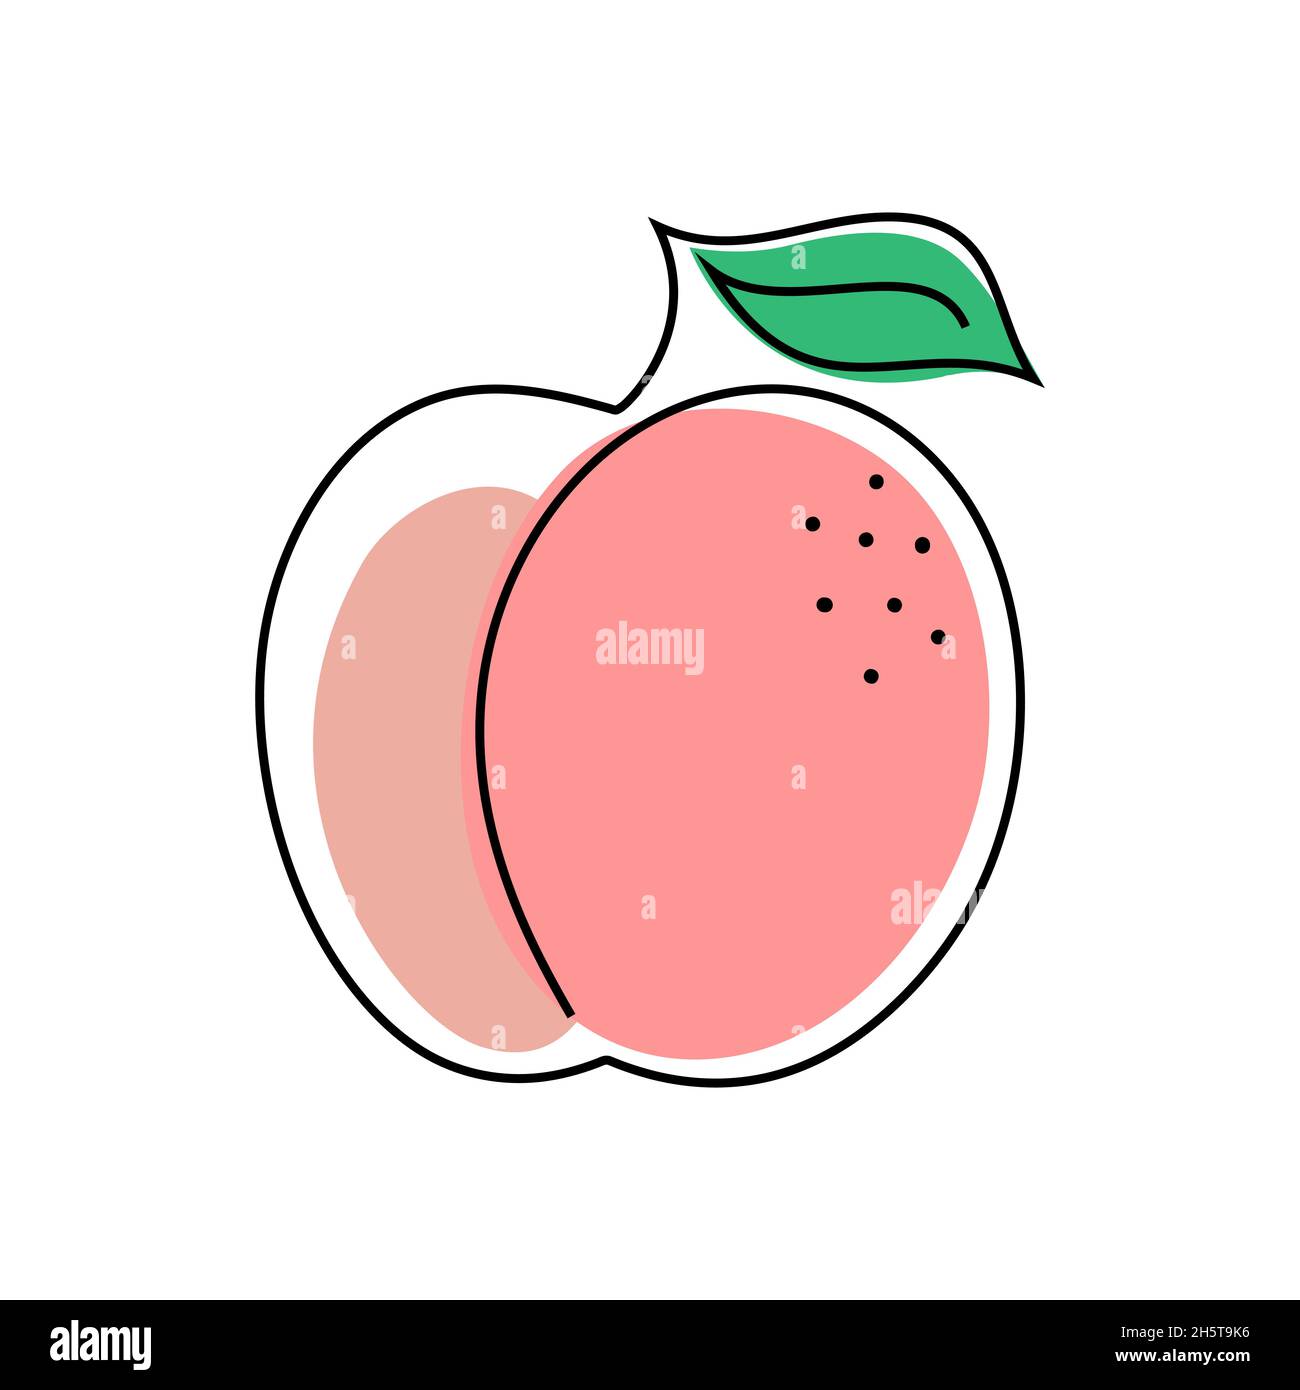 Peach icon in one line drawing style Stock Vector